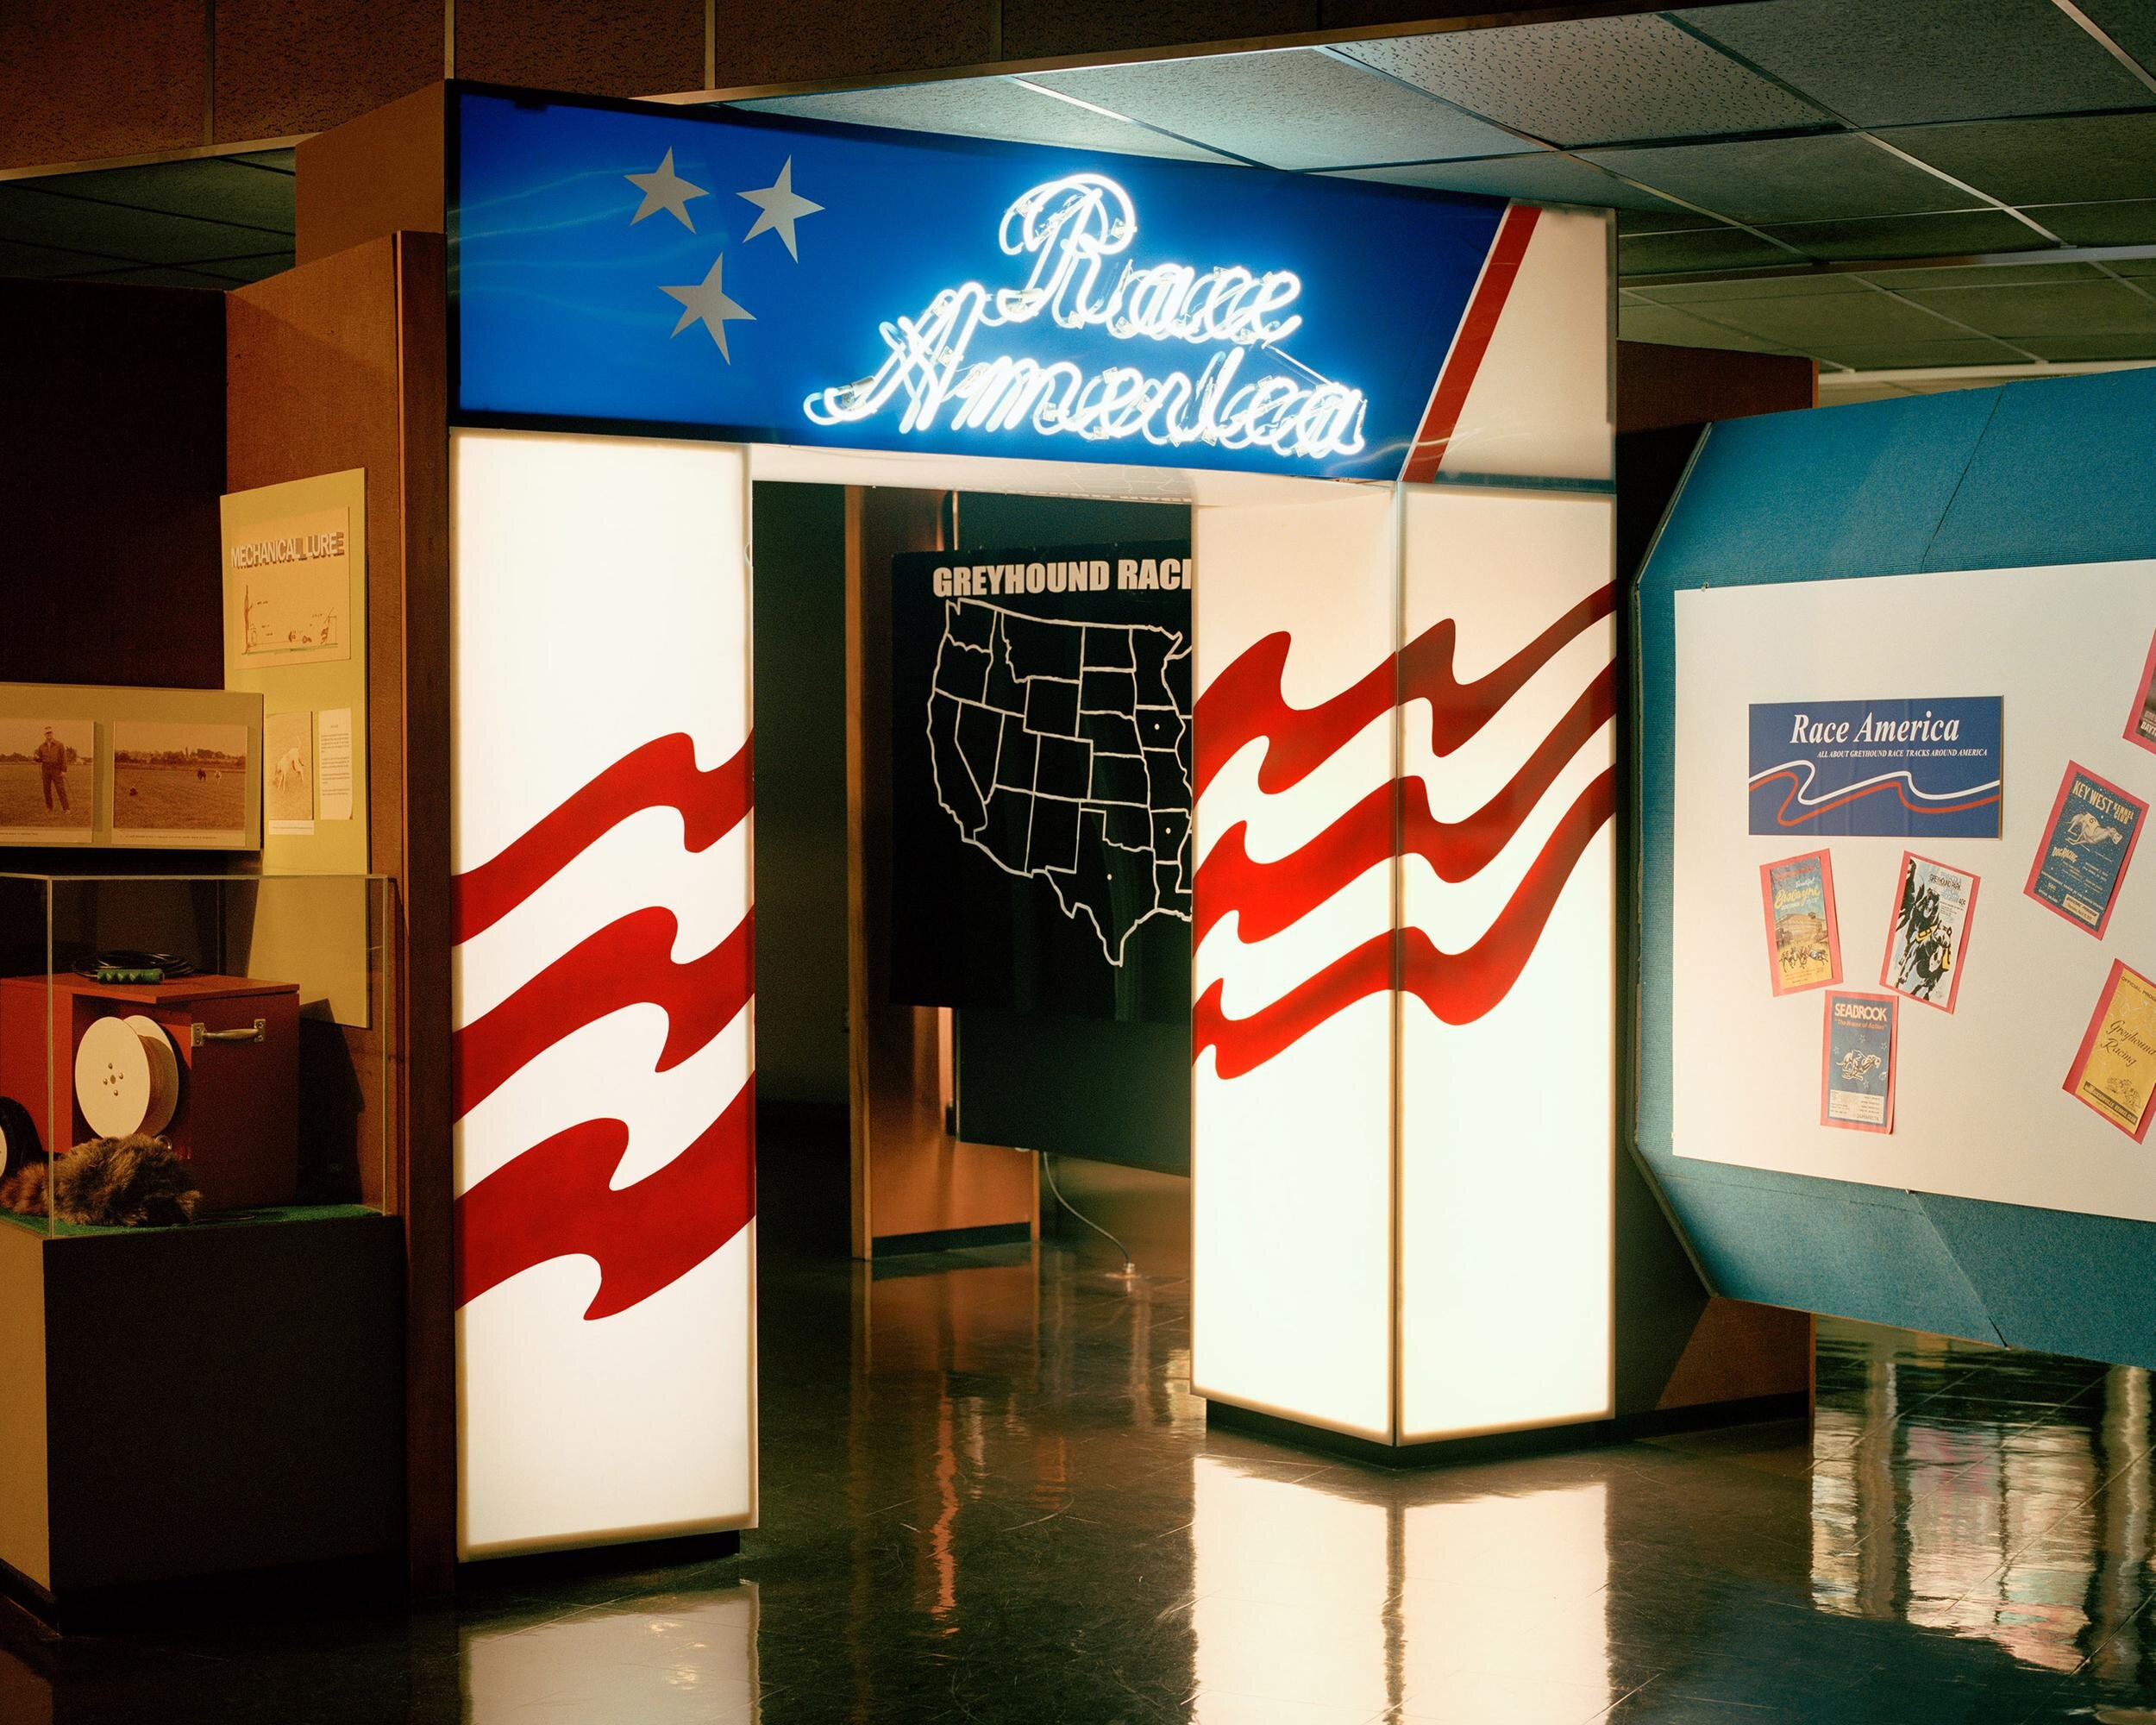 Color photograph shows greyhound racing museum exhibition--a neon sign reads "Race America"